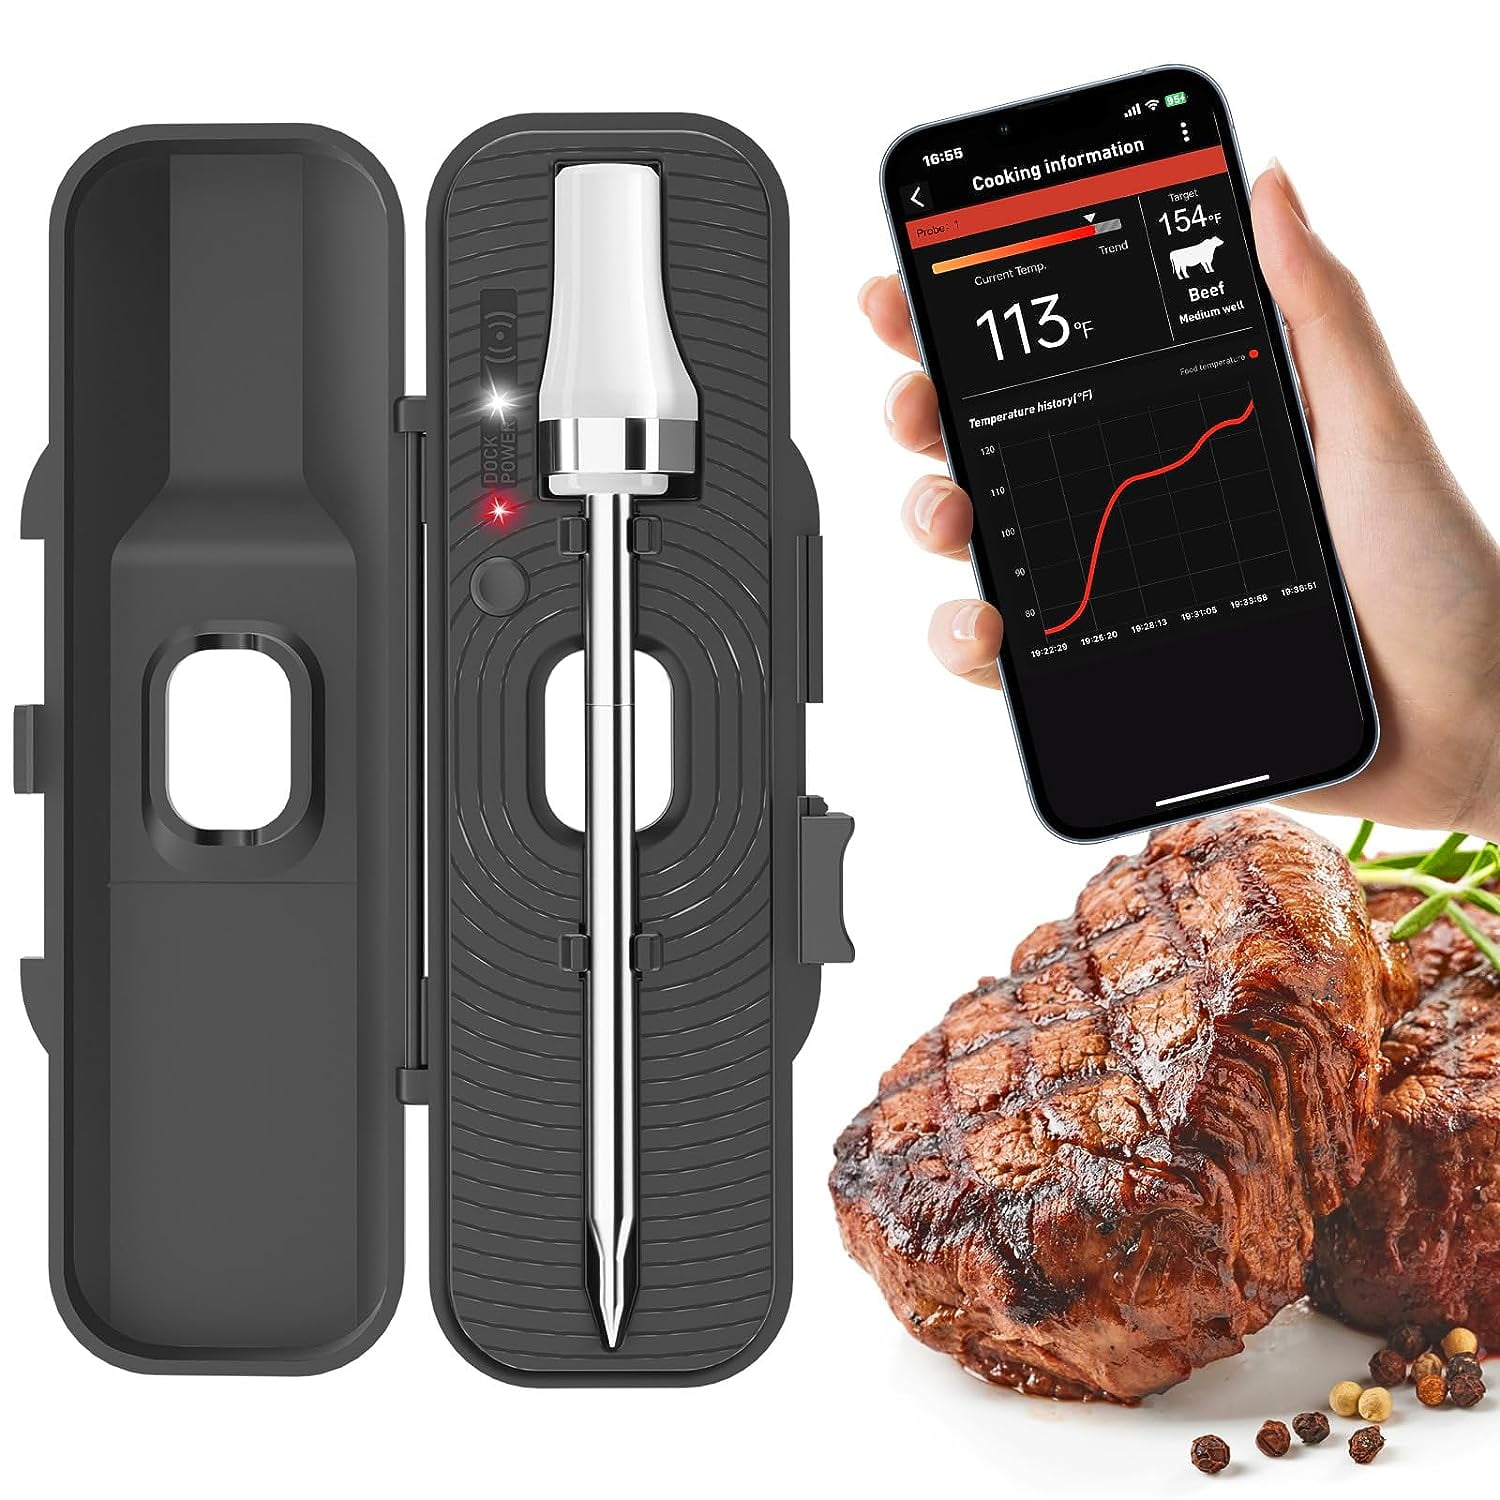 BBQ Dragon Digital Meat Thermometer & Reviews